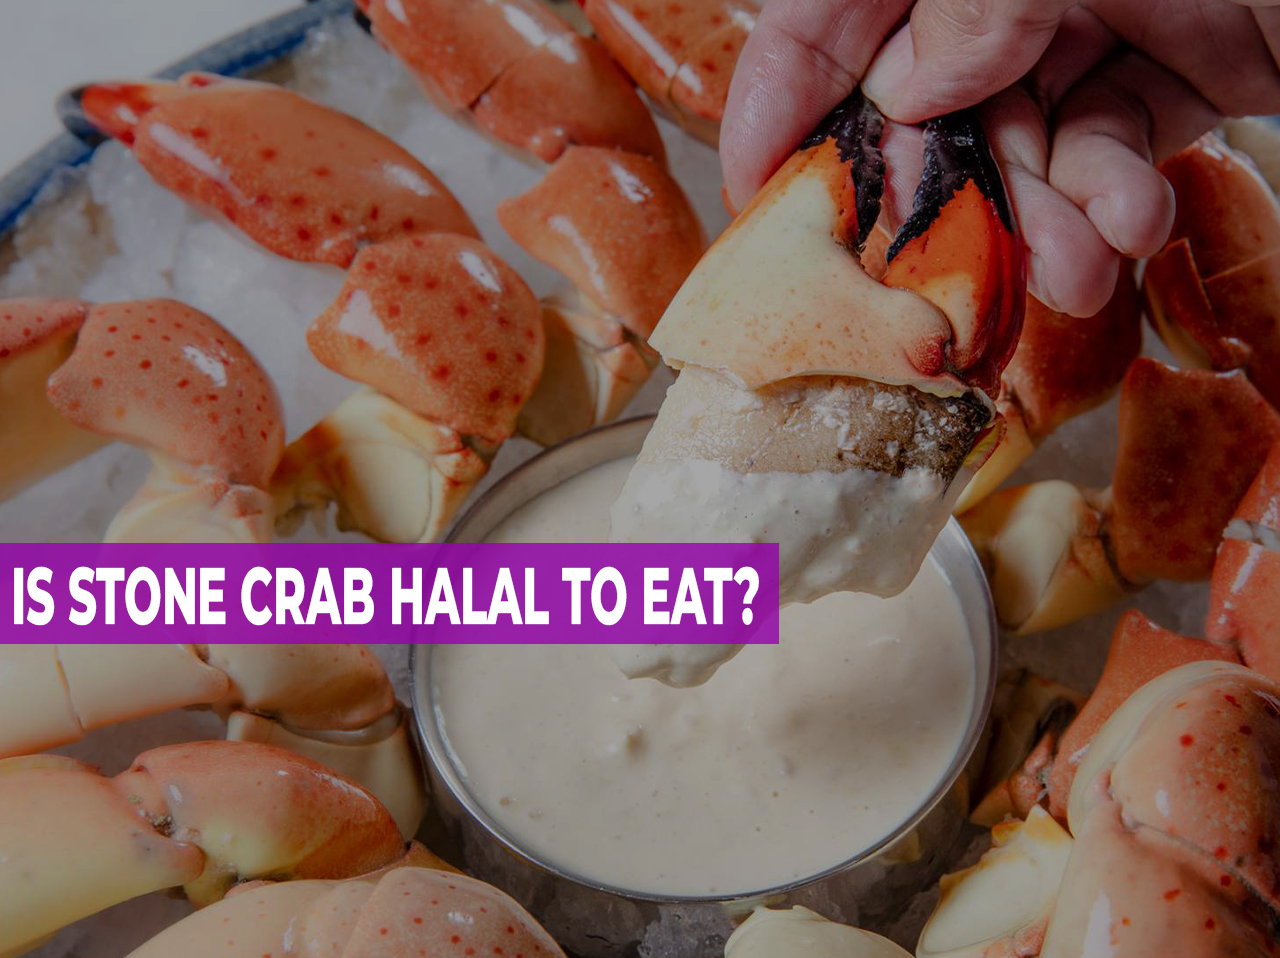 IS STONE CRAB HALAL TO EAT?